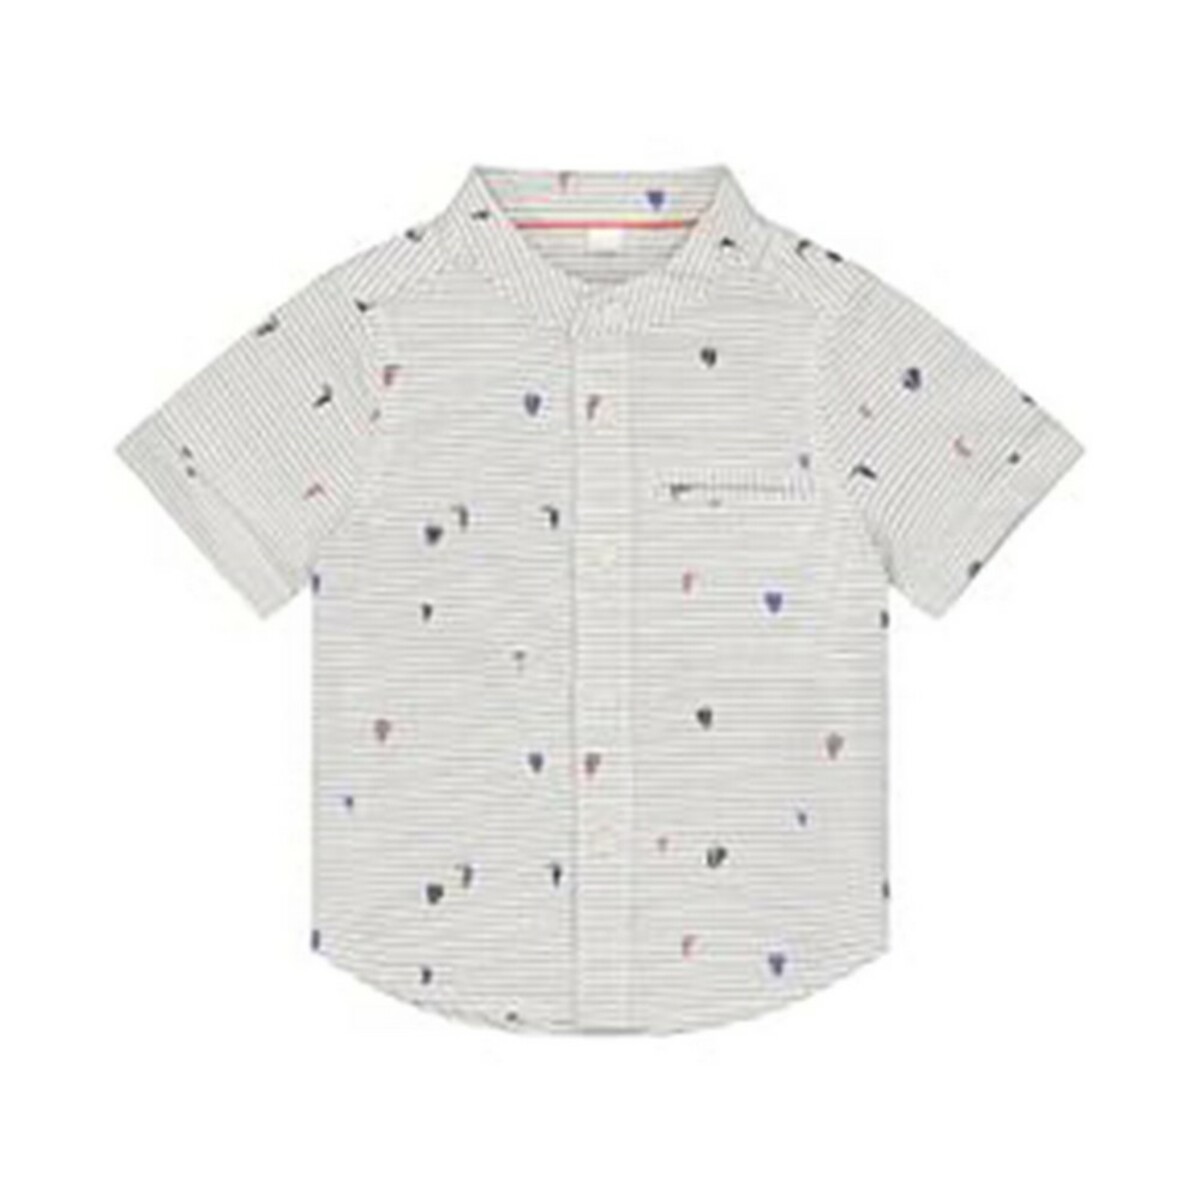 Mother Care Boys Half Sleeves Shirt Stripes And Printed - White